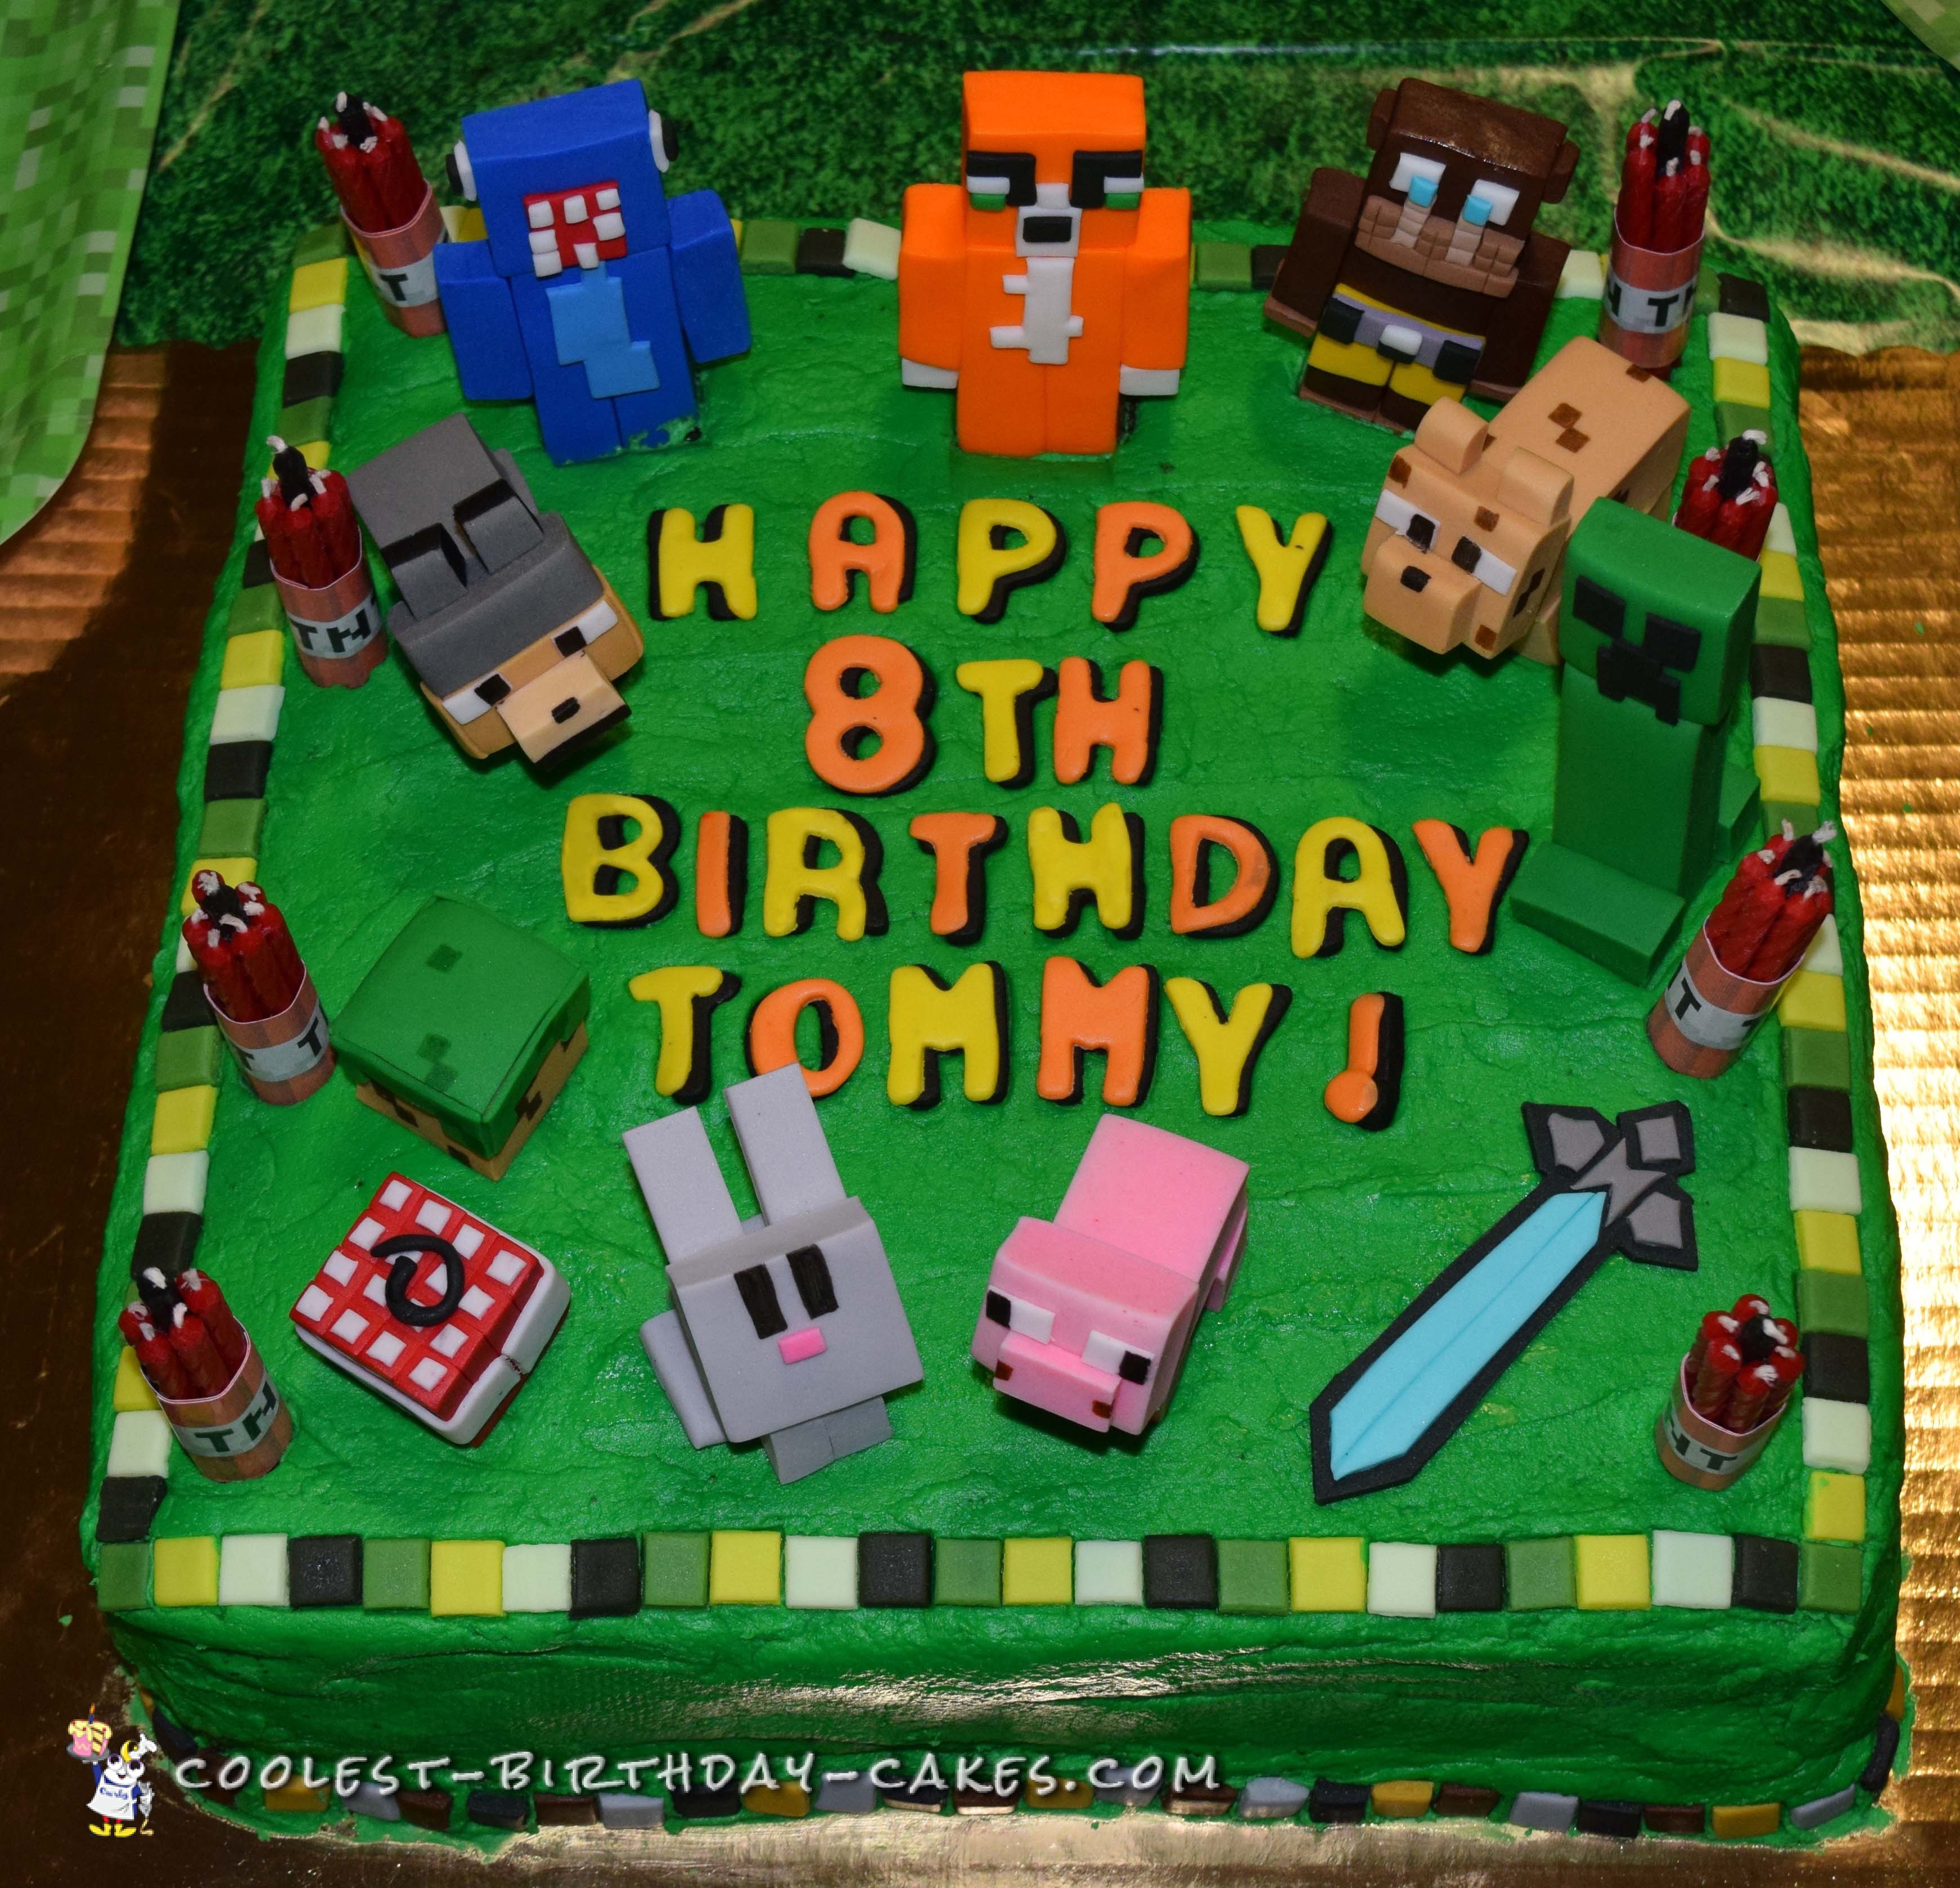 16 Minecraft Birthday Cake Ideas and Recipes to Inspire You - Mom's Got the  Stuff